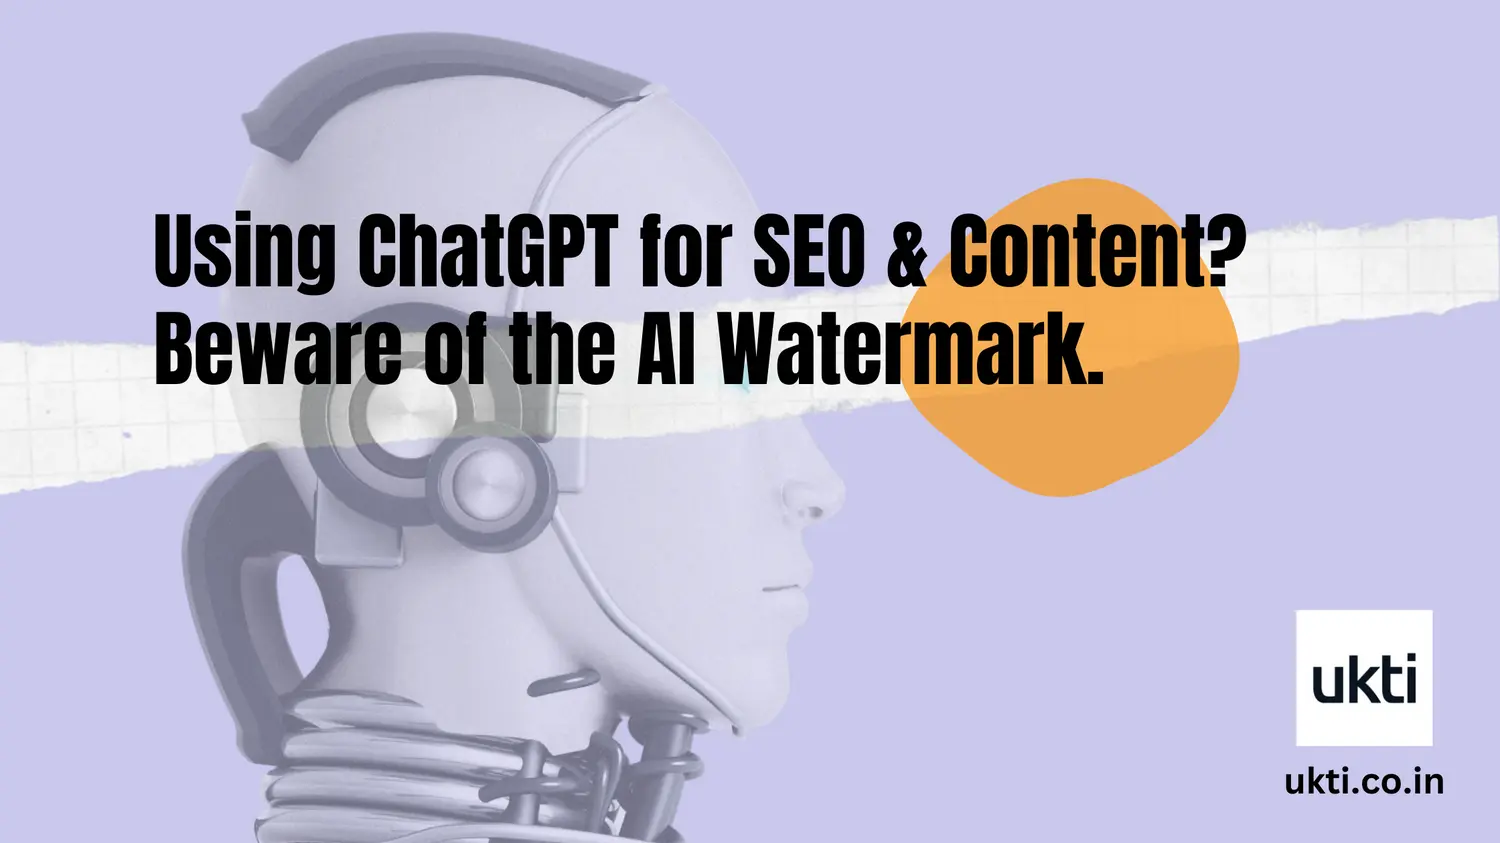 Using ChatGPT for SEO and content? Beware of the AI watermark.